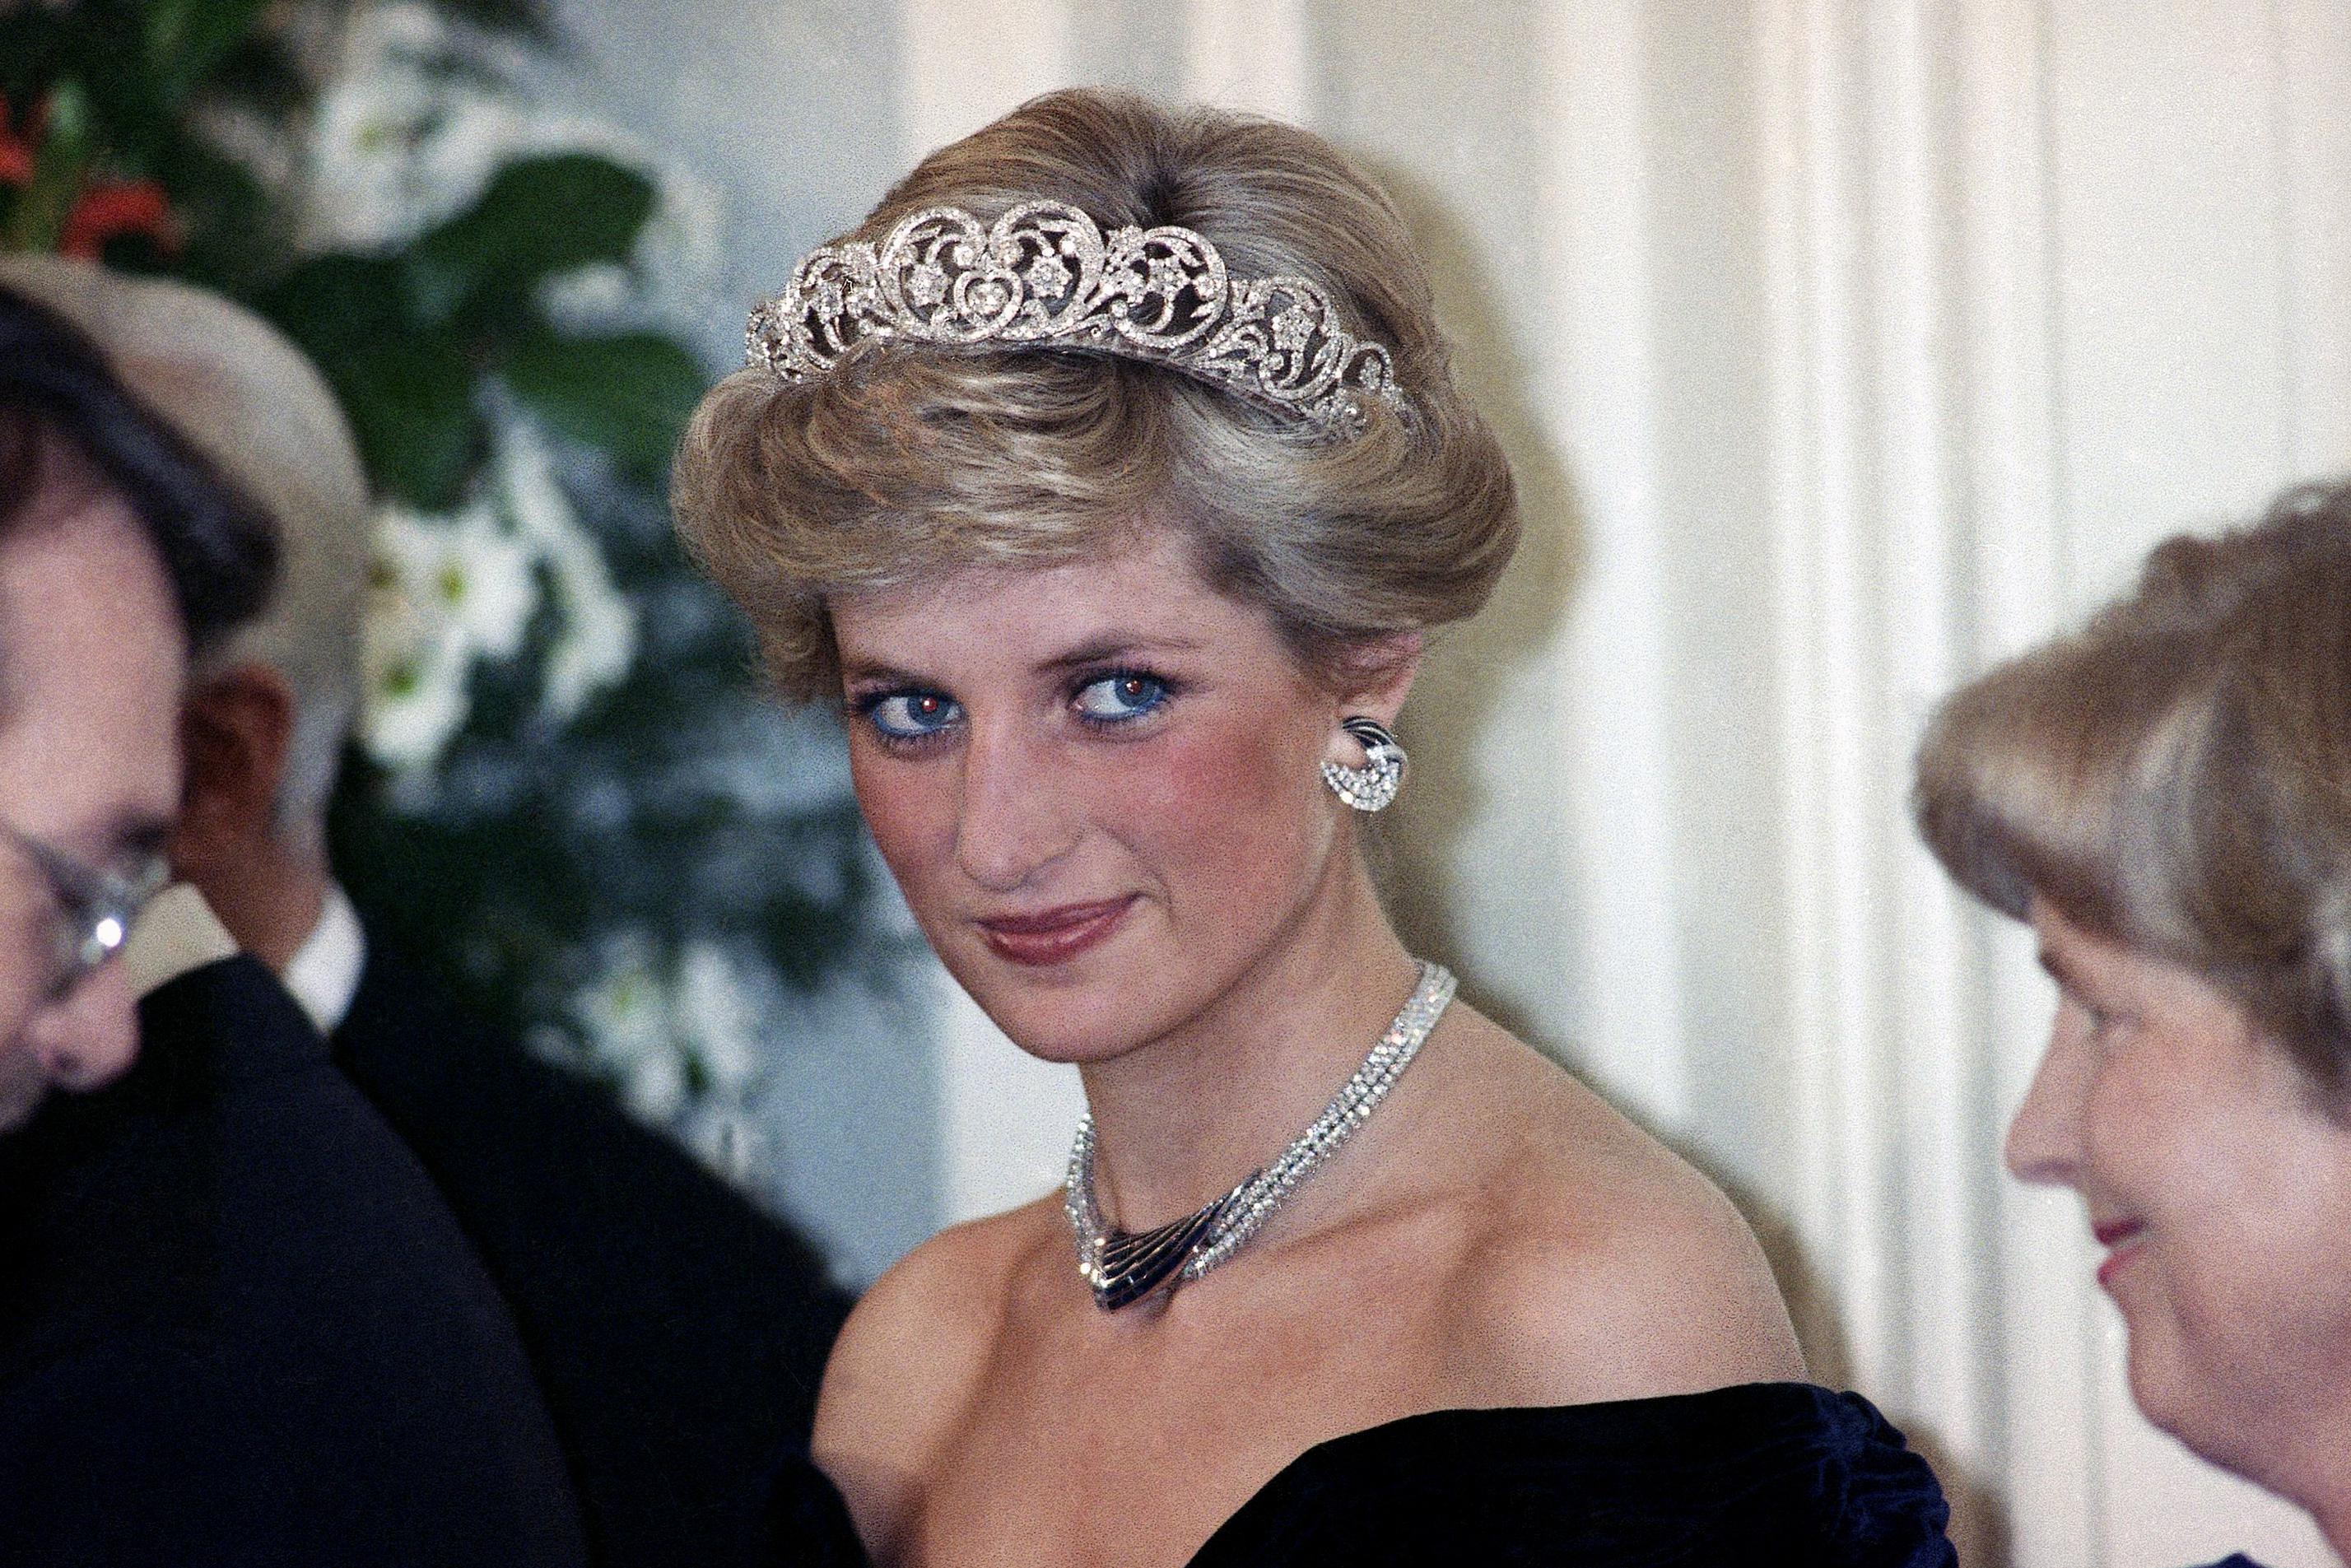 Lady diana music, videos, stats, and photos